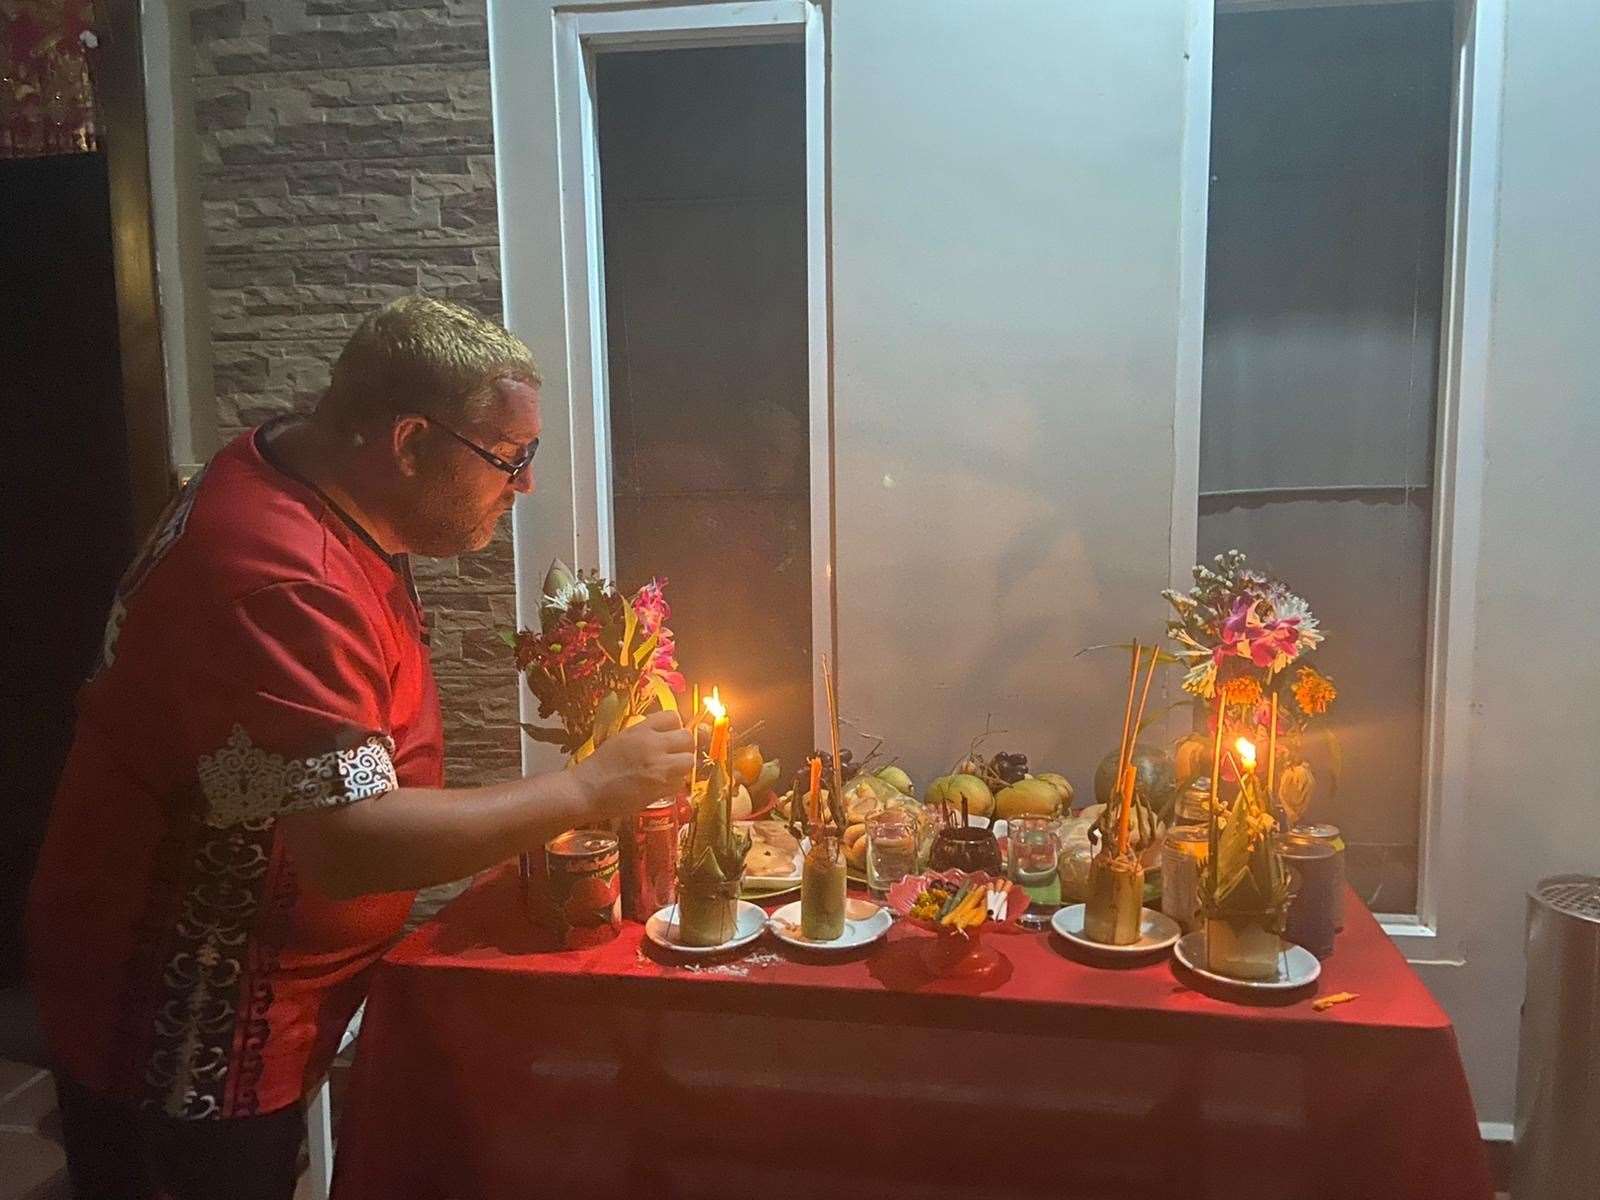 Gareth puts out offerings for Kymer new year in Cambodia on April 13. The streets are normally full of parties and people and water fights in Bar Street in Siem Reap but none of that happened this year